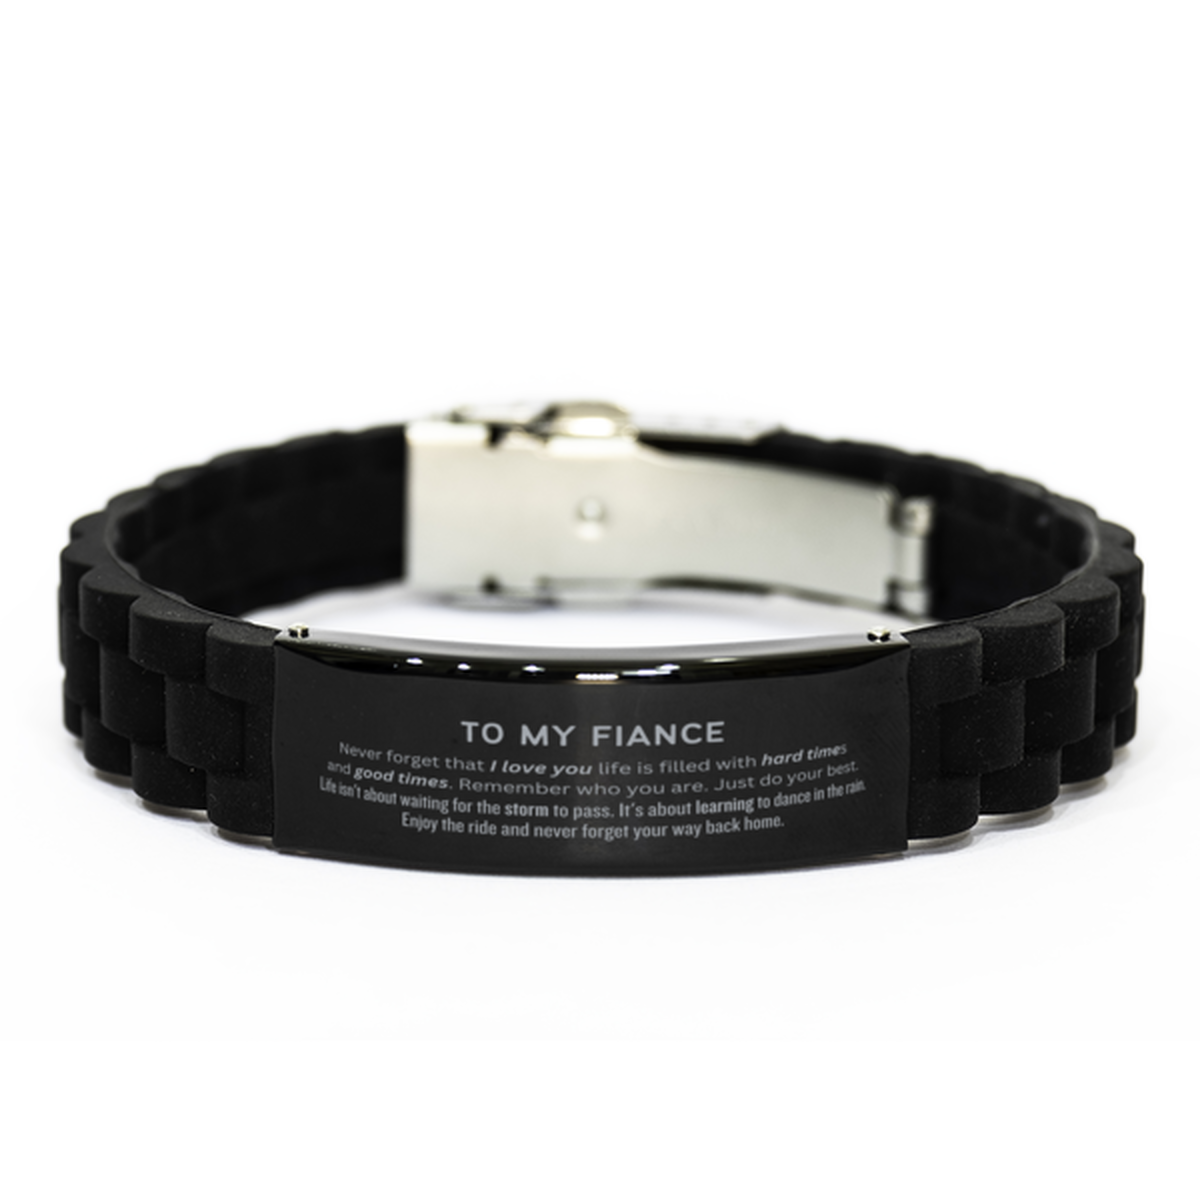 Christmas Fiance Black Glidelock Clasp Bracelet Gifts, To My Fiance Birthday Thank You Gifts For Fiance, Graduation Unique Gifts For Fiance To My Fiance Never forget that I love you life is filled with hard times and good times. Remember who you are. Just